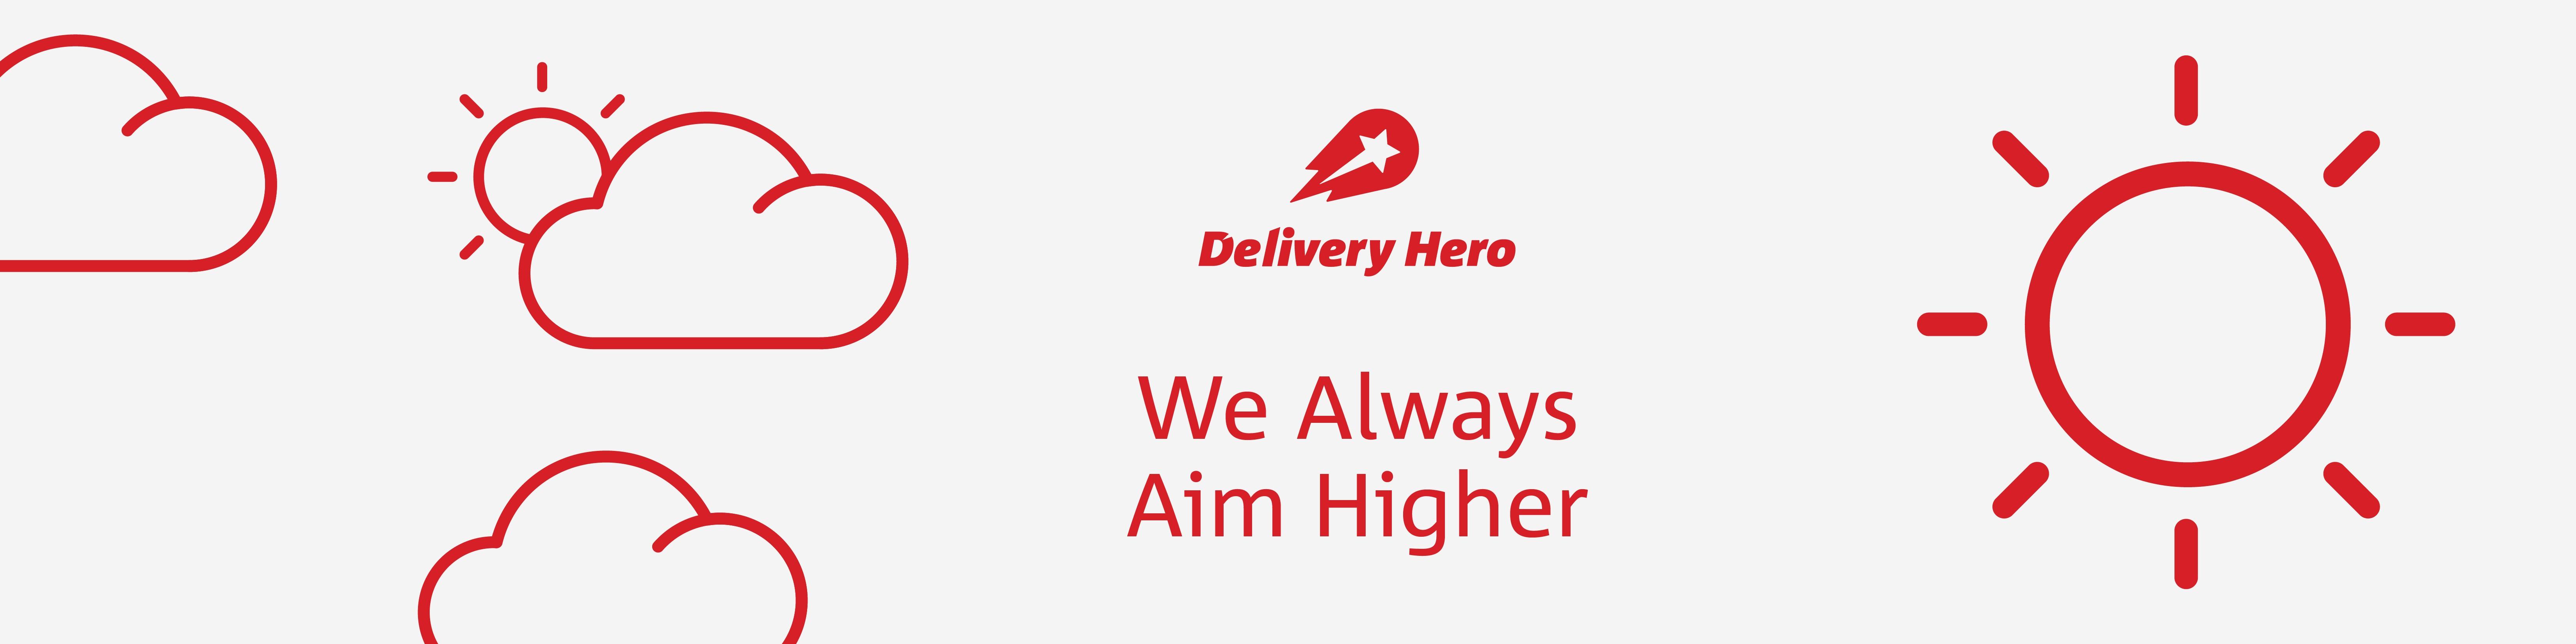 Delivery Hero / startup from Berlin / Background